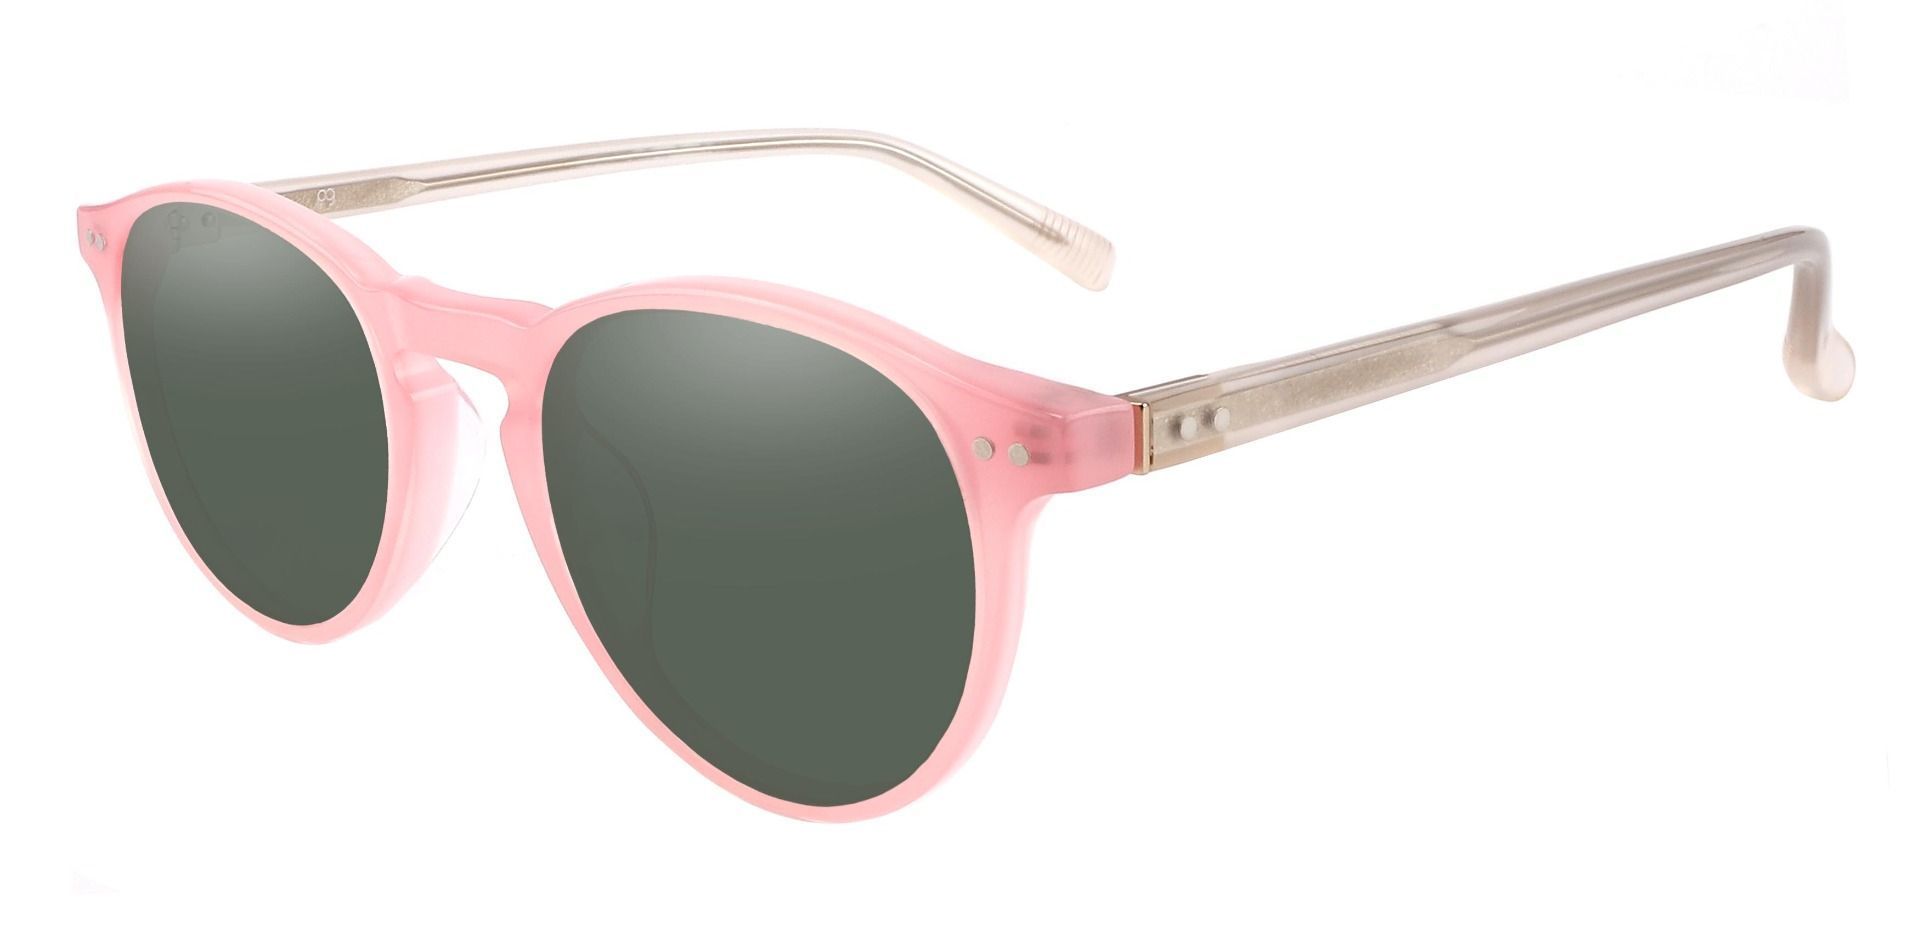 Monarch Oval Non-Rx Sunglasses - Pink Frame With Green Lenses